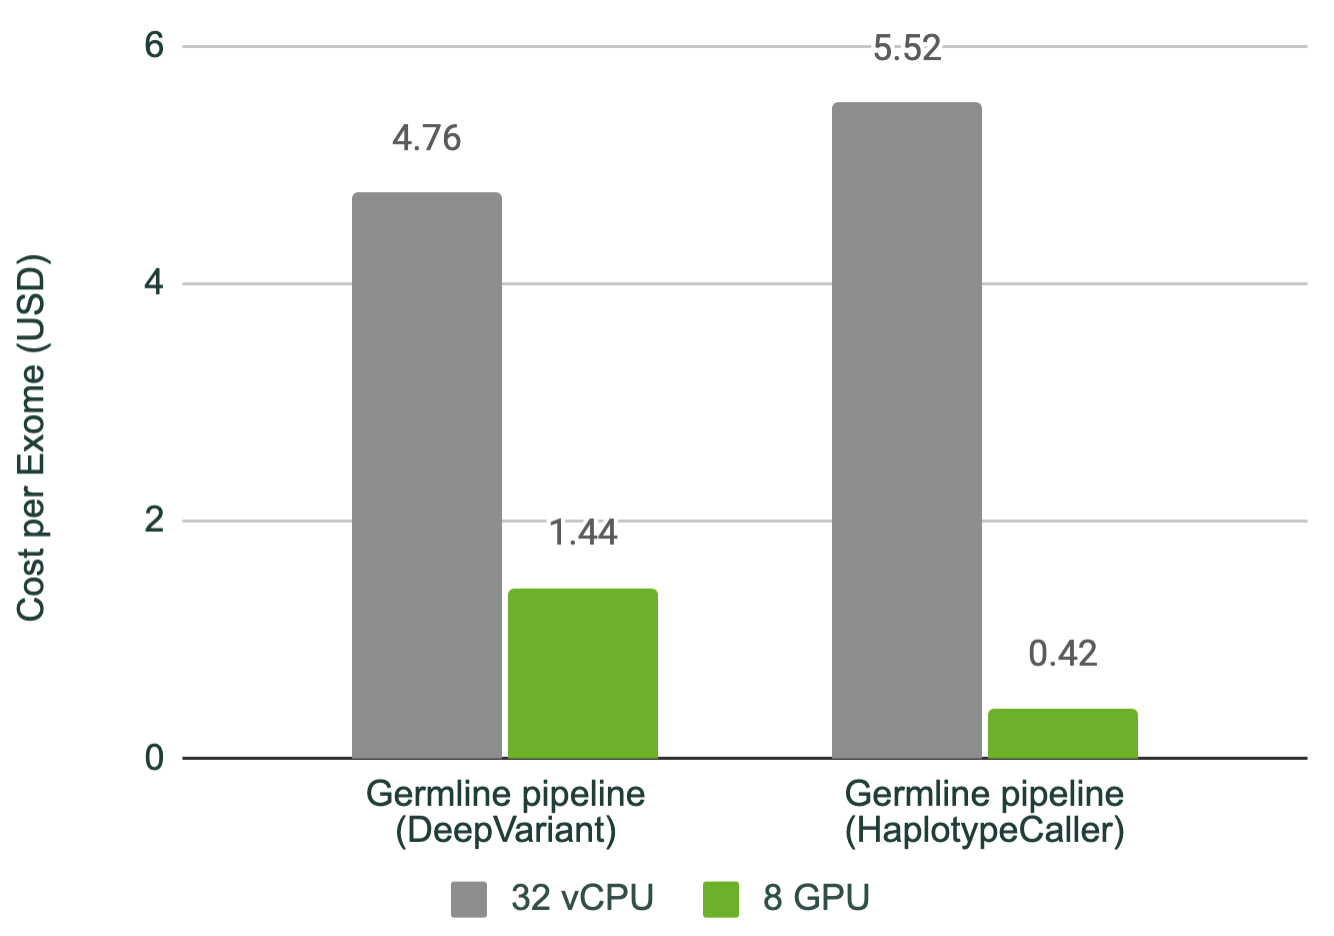 Bar chart showing cost per exome decreasing by 70% with DeepVariant and 92% with HaplotypeCaller when using 8 GPUs instead of 32 virtual CPUs.